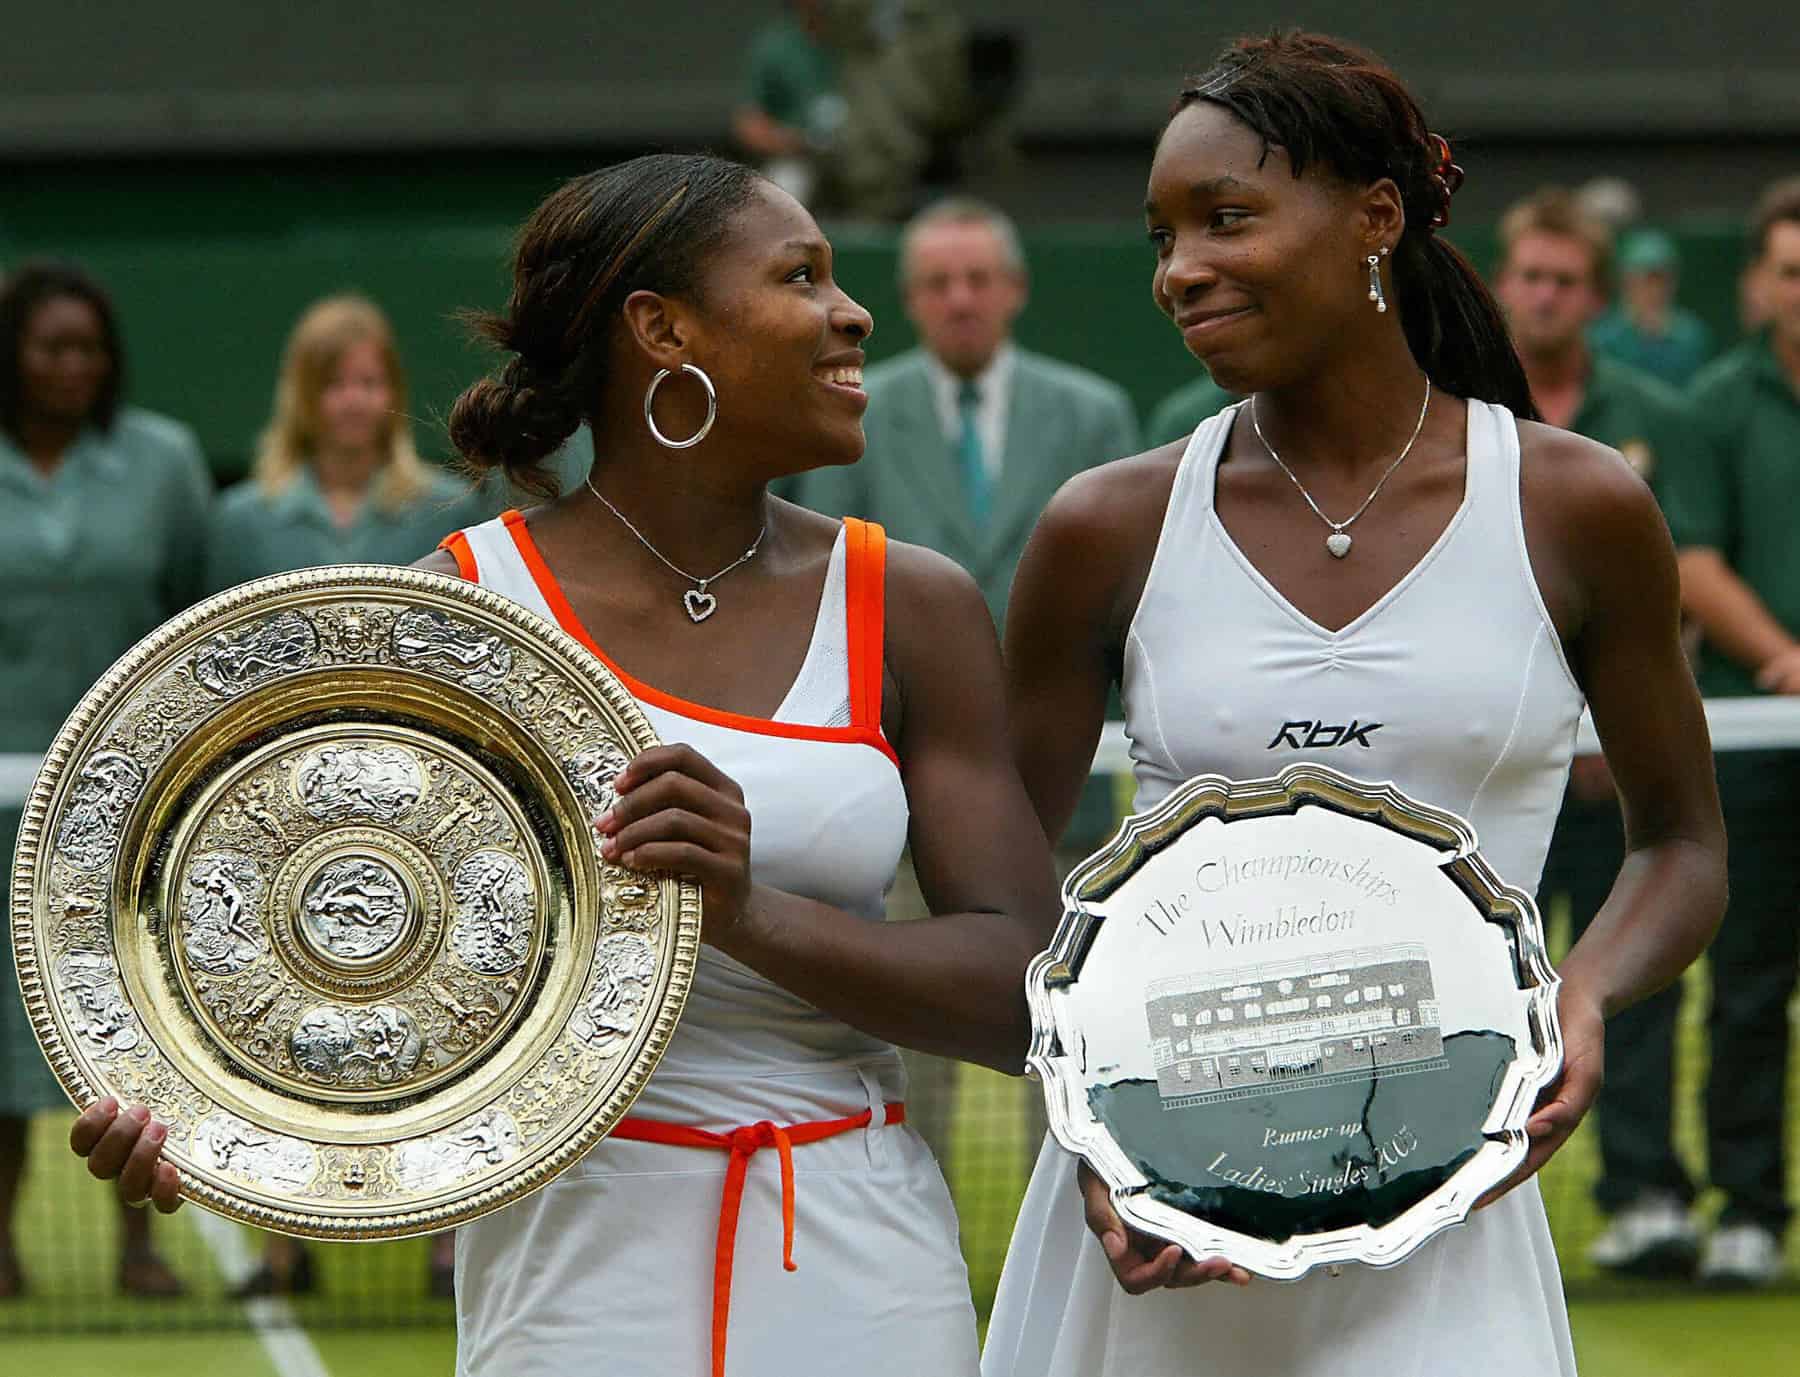 Williams sisters excitement after victory